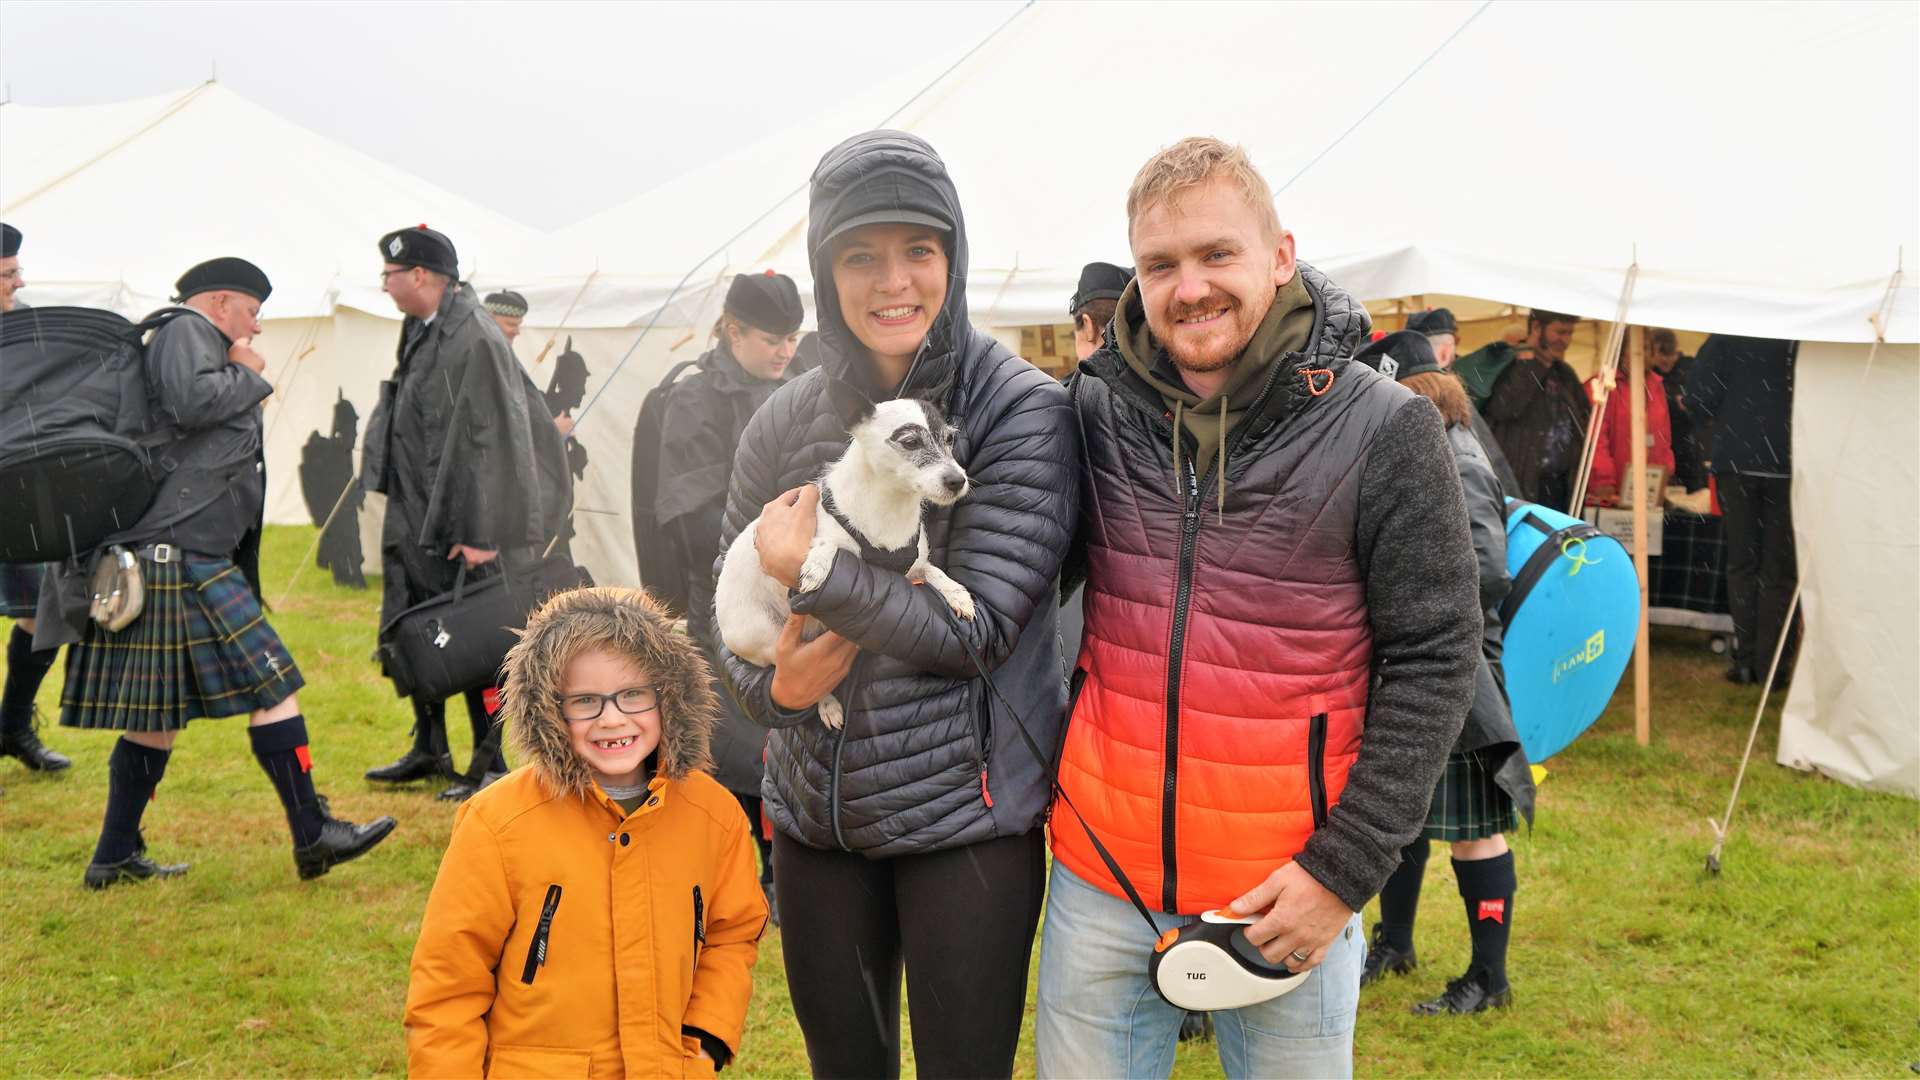 Louise and Sean Hirst with their son Noah and Tilly the dog. The family were travelling the NC500 and just came upon the event by chance. 'We just turned up and saw him [Prince Charles]. It's made our holiday,' said Louise. 'I was shocked and really didn't expect him to be here,' said Sean. Picture: DGS